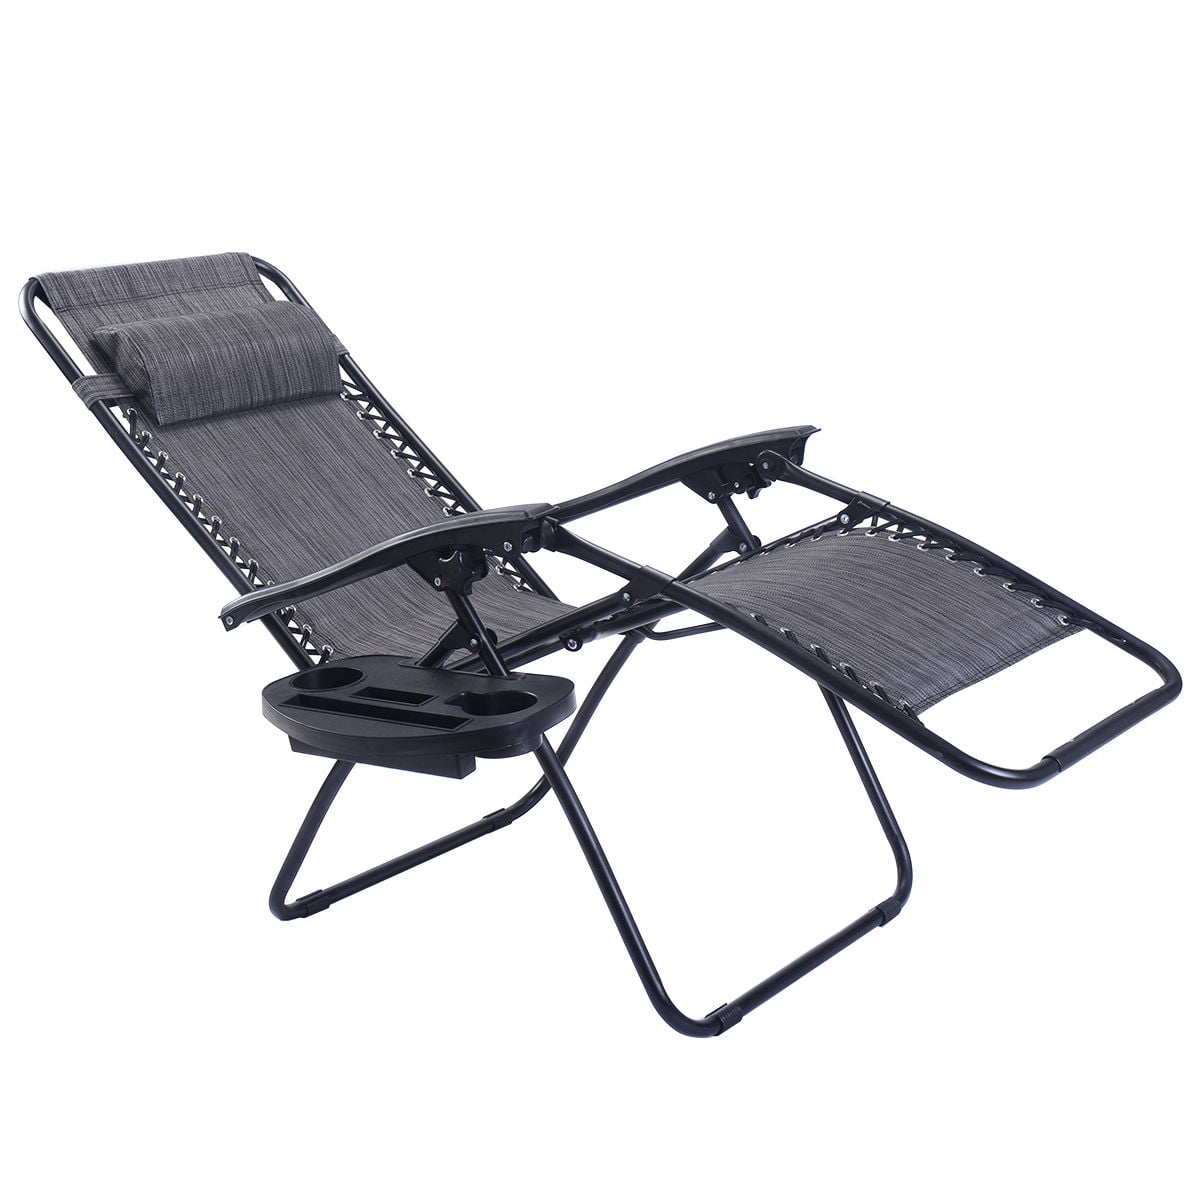 Portable Gravity Folding Lounge Beach/ Chairs Outdoor Camping Recliner Tray only 